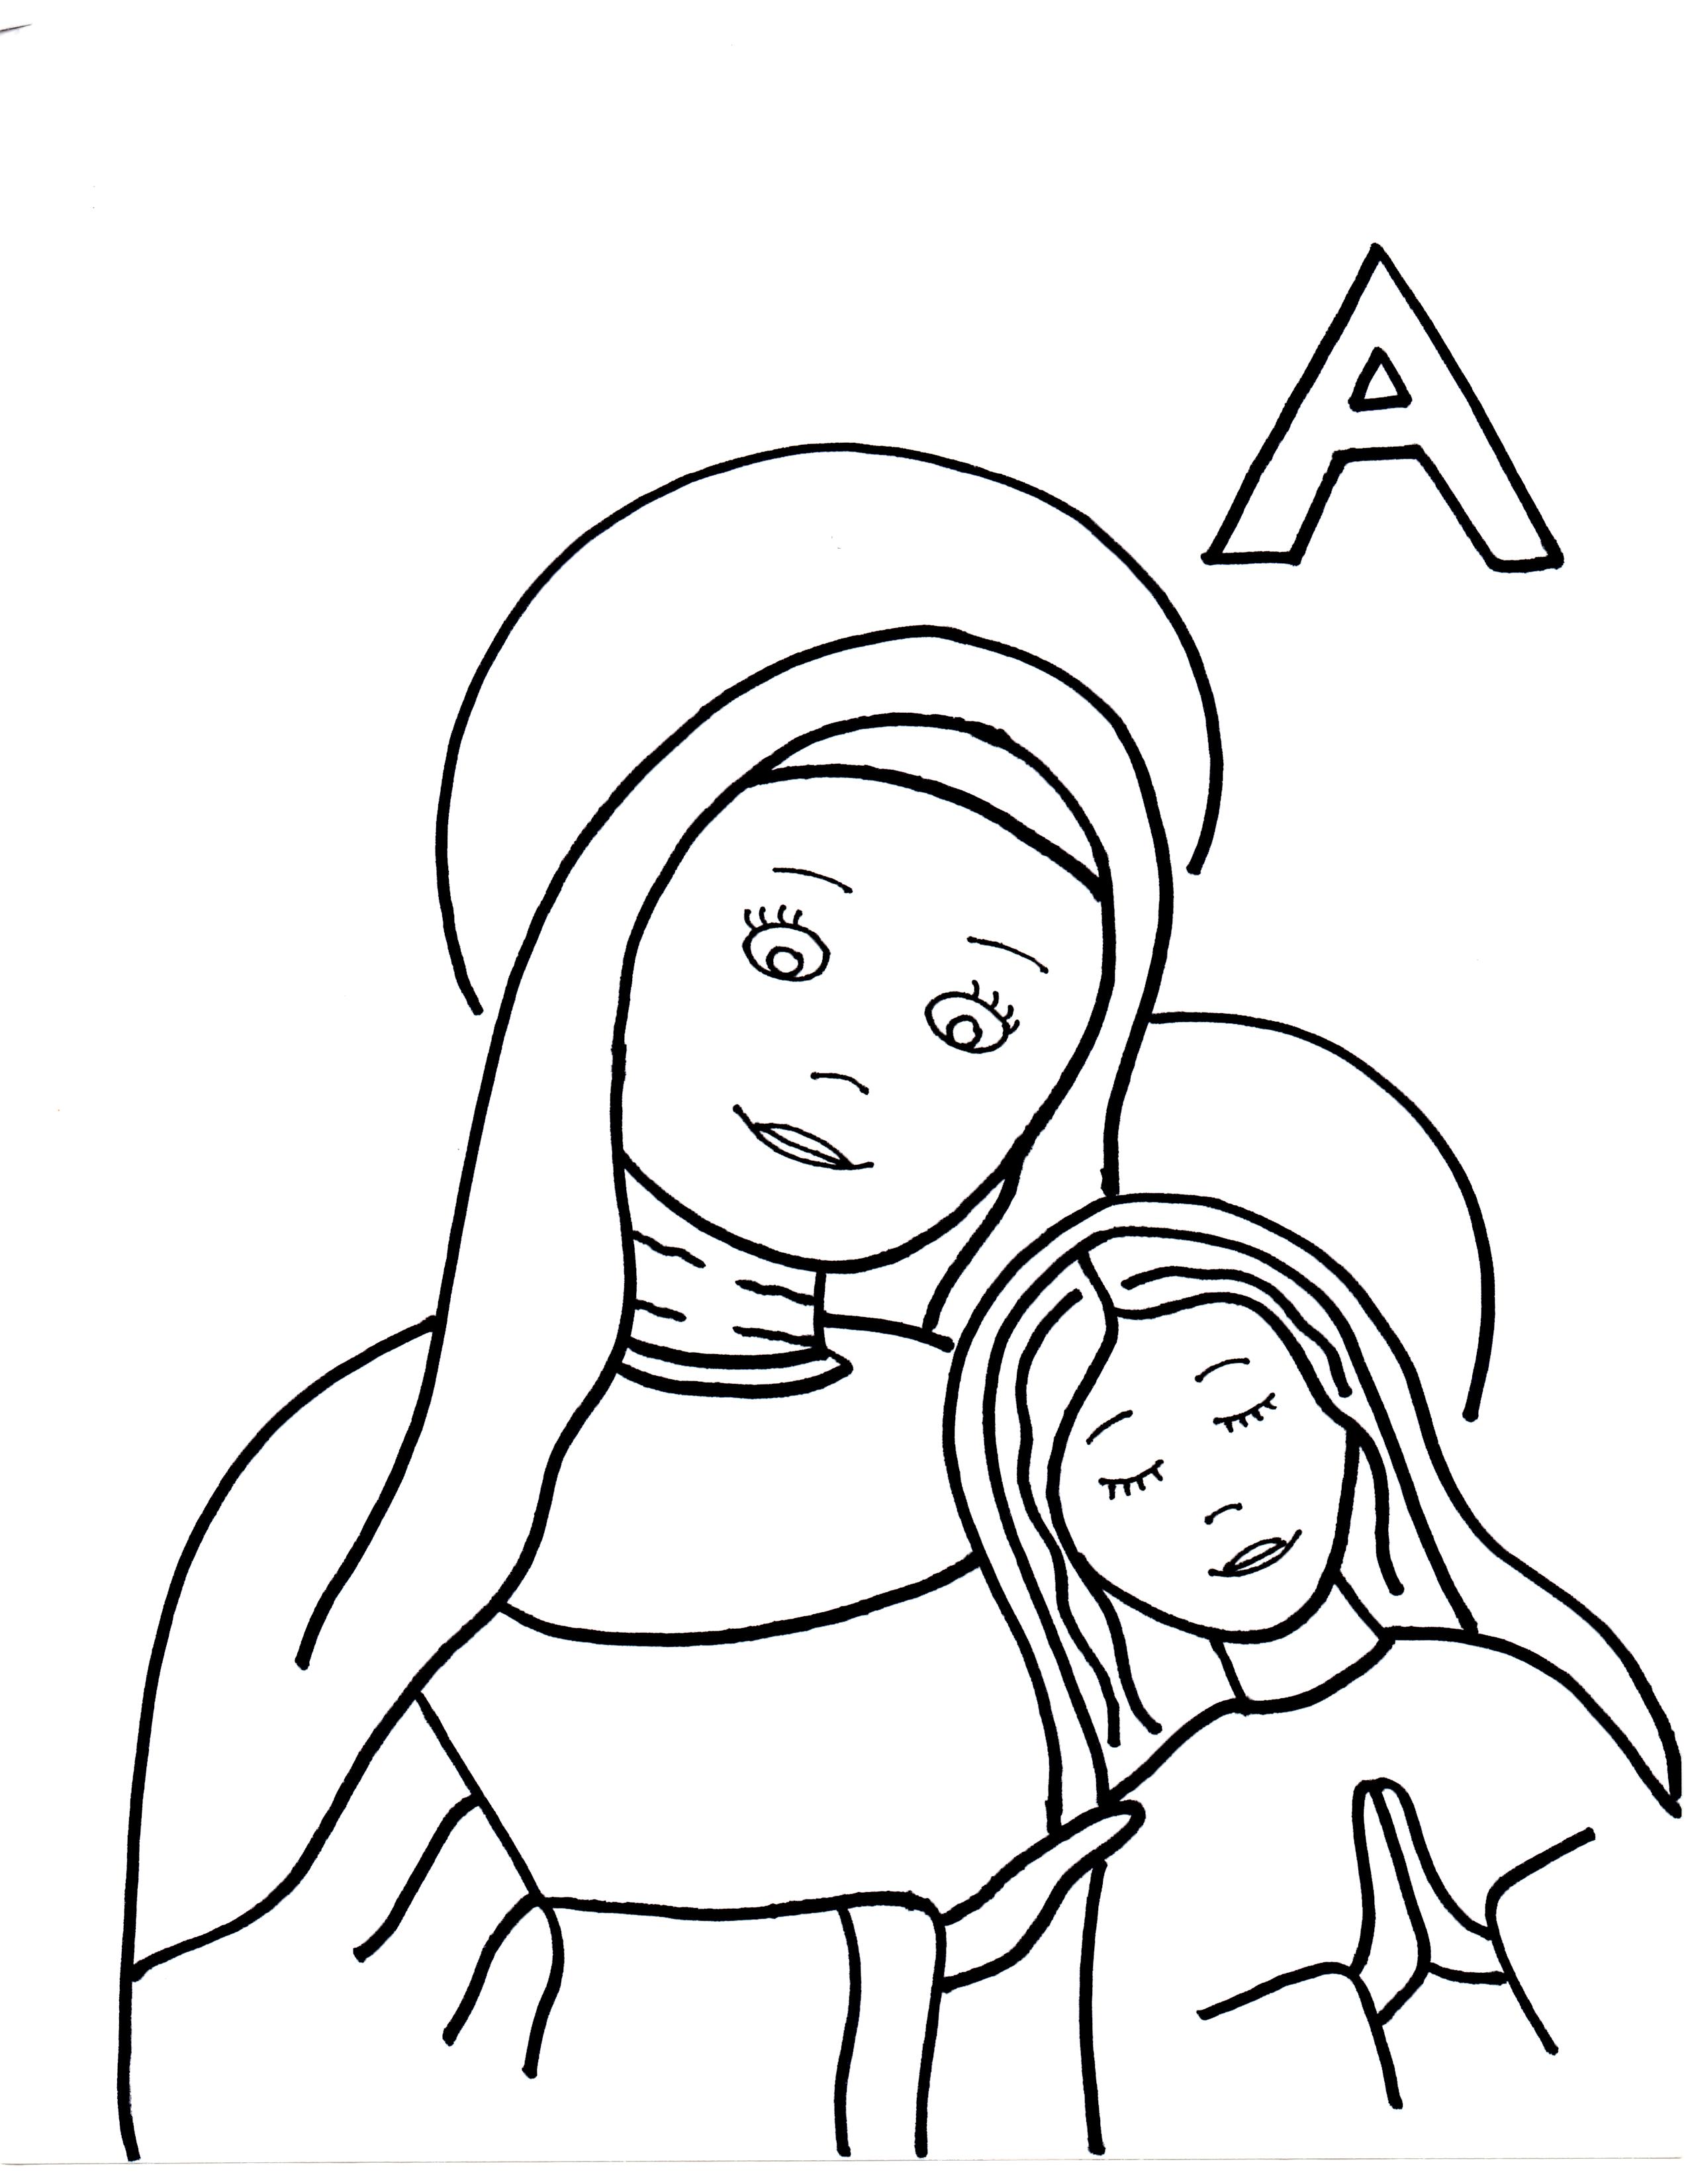 A is for St. Anne | Saints to Color